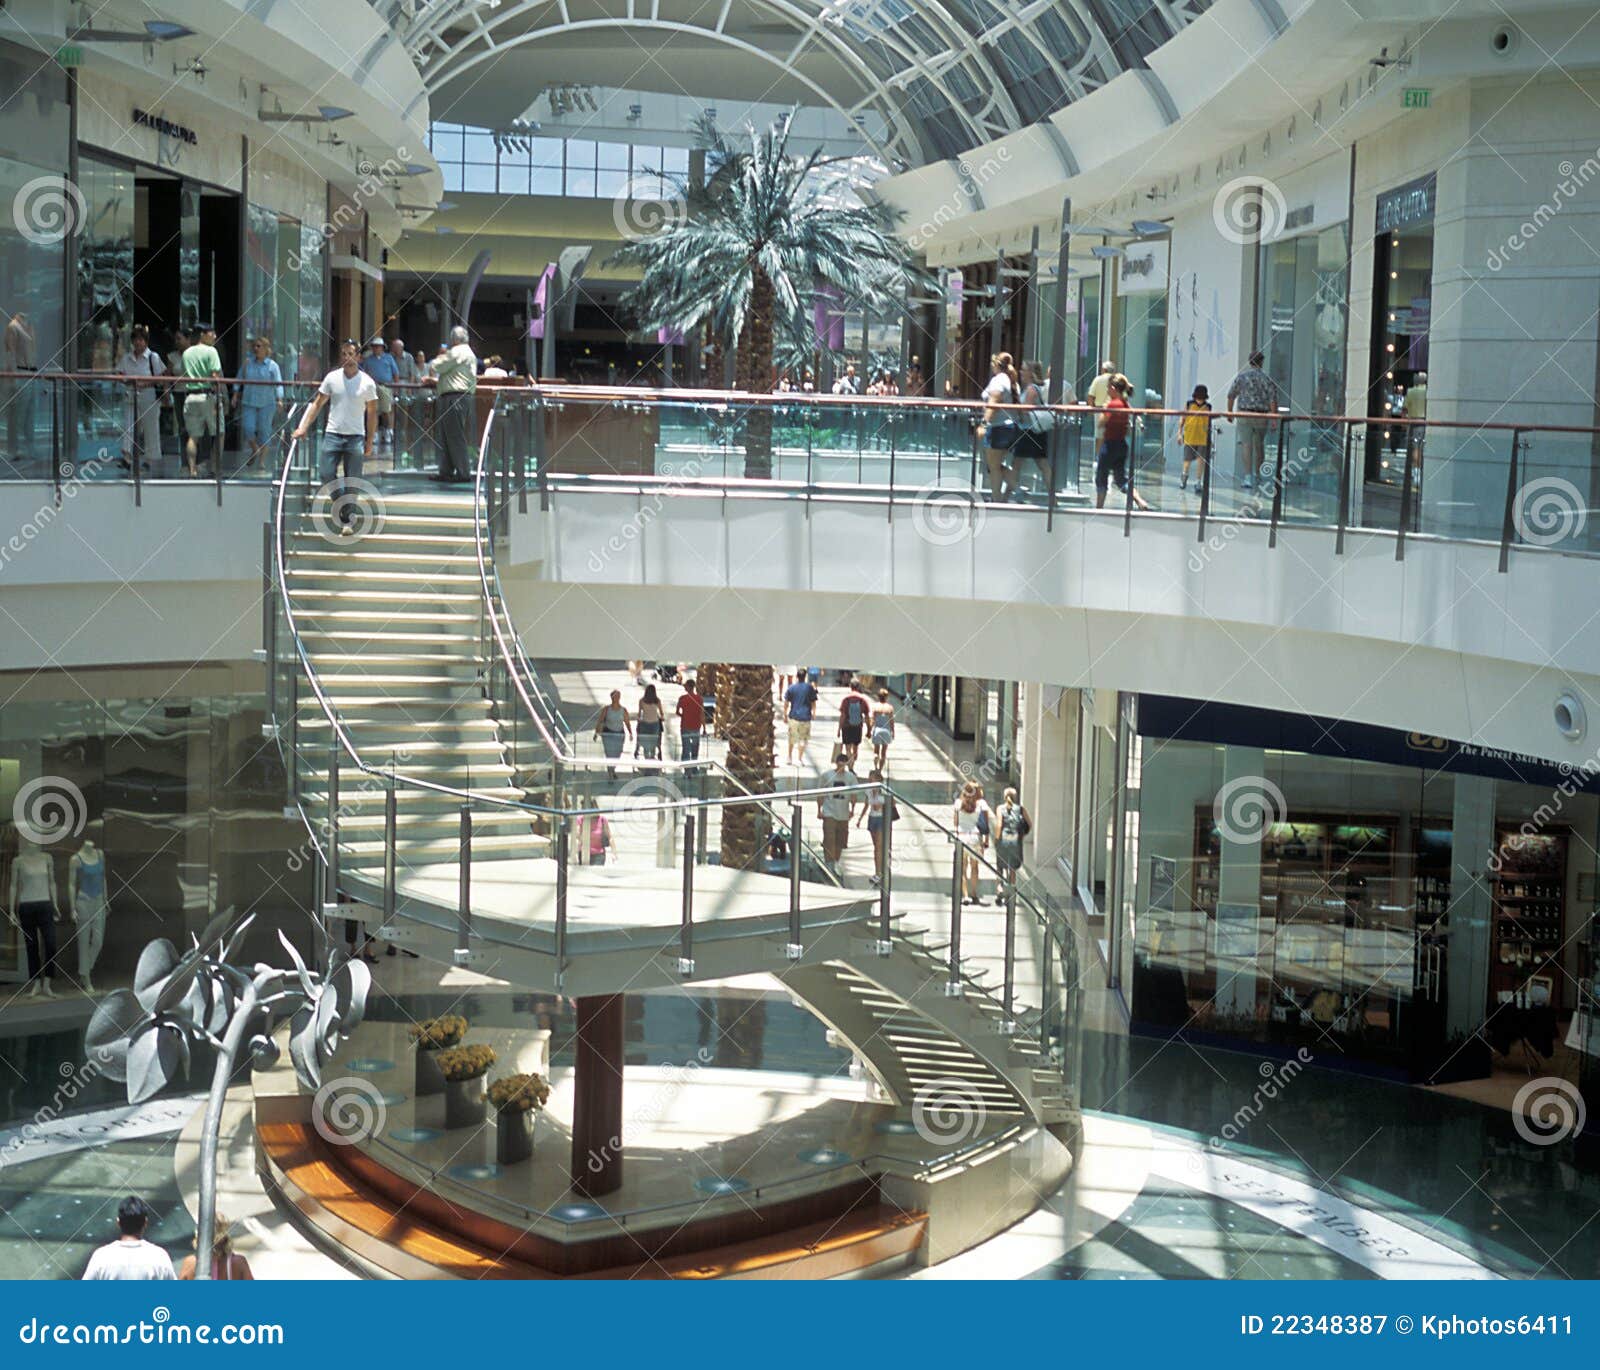 The Mall at Millenia - All You Need to Know BEFORE You Go (with Photos)